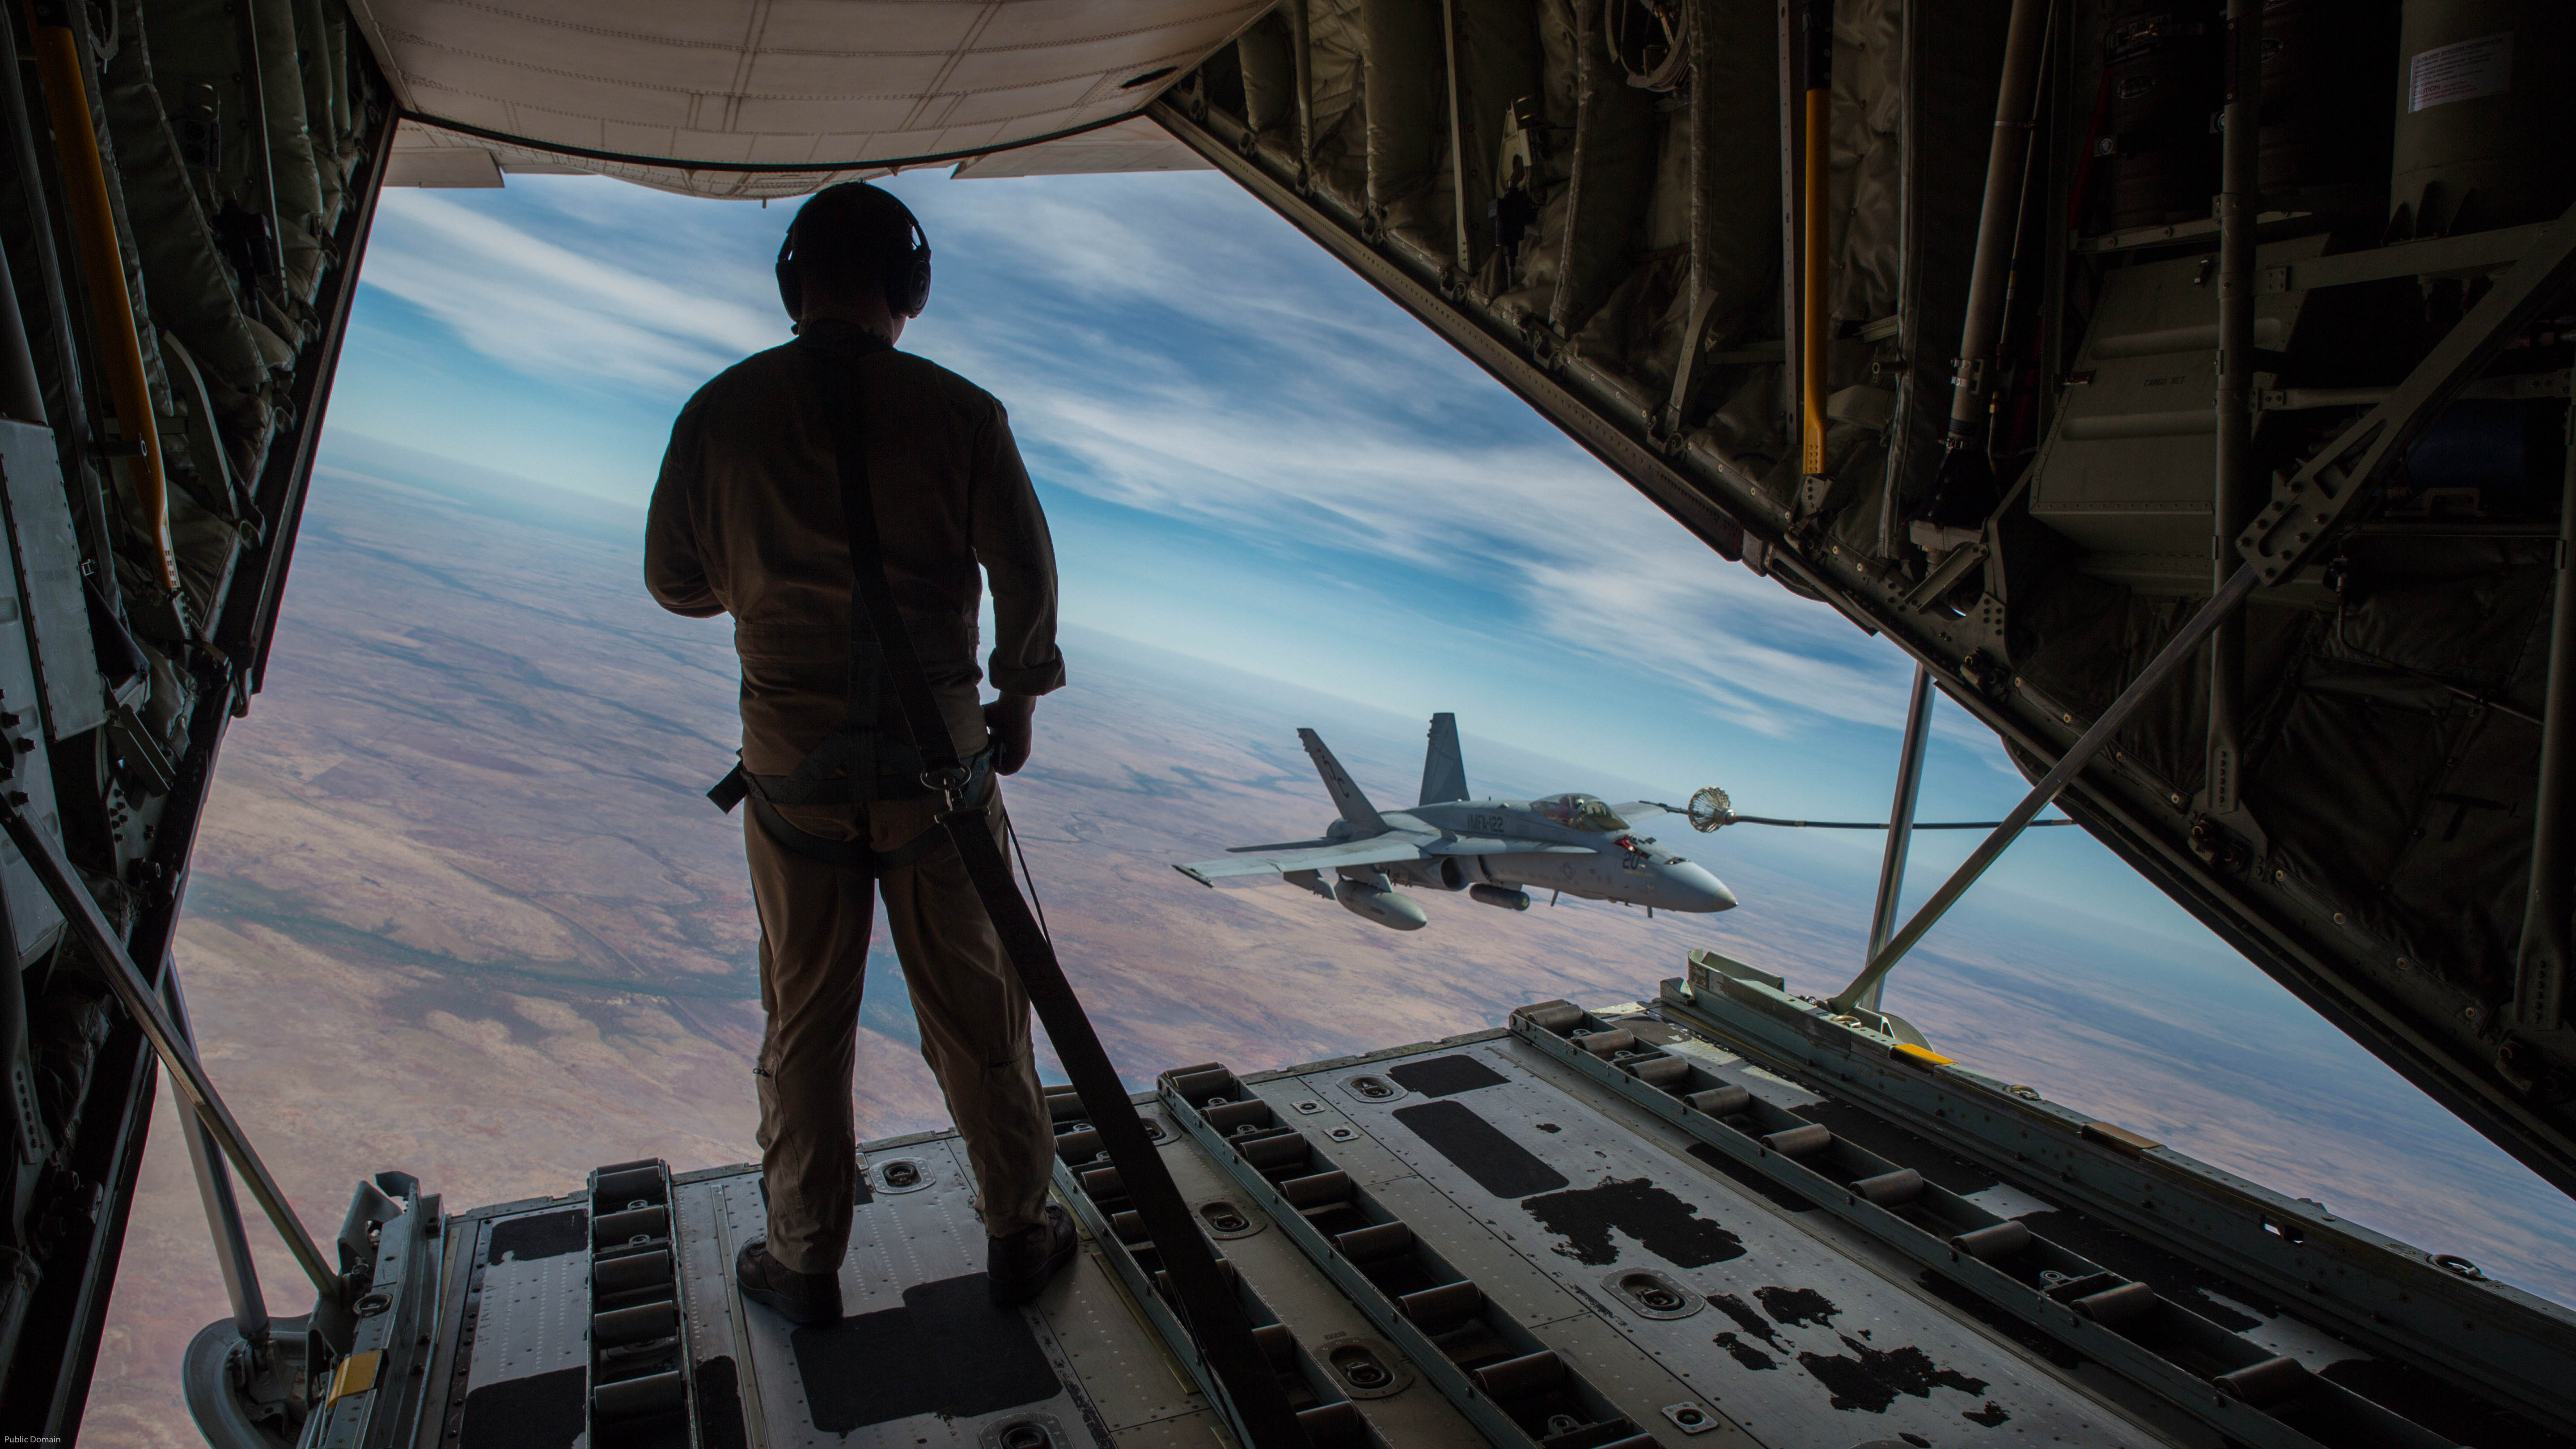 U.S. Marine Corps Cpl. Chris Lawler, a crewmaster with Marine Aerial Refueler Transport Squadron (VMGR) 152, observes an F/A-18C Hornet with Marine Fighter Attack Squadron (VMFA) 122 approach the refueling hose during Exercise Pitch Black 2016 at Royal Australian Air Force Base Tindal, Australia, Aug. 9, 2016. U.S. Marine Corps Photo